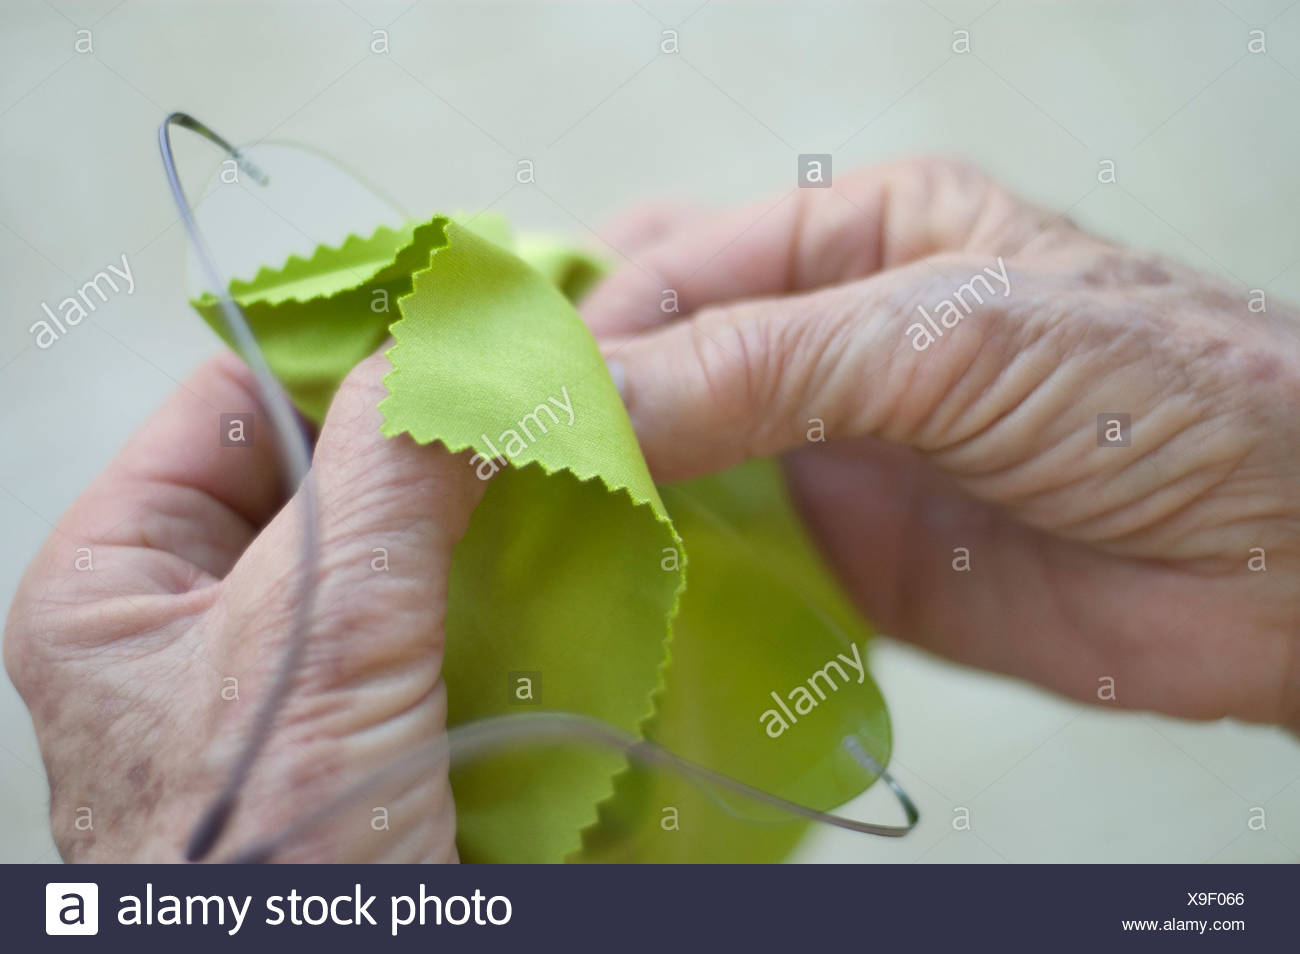 old-woman-cleaning-her-glasses-X9F066.jpg